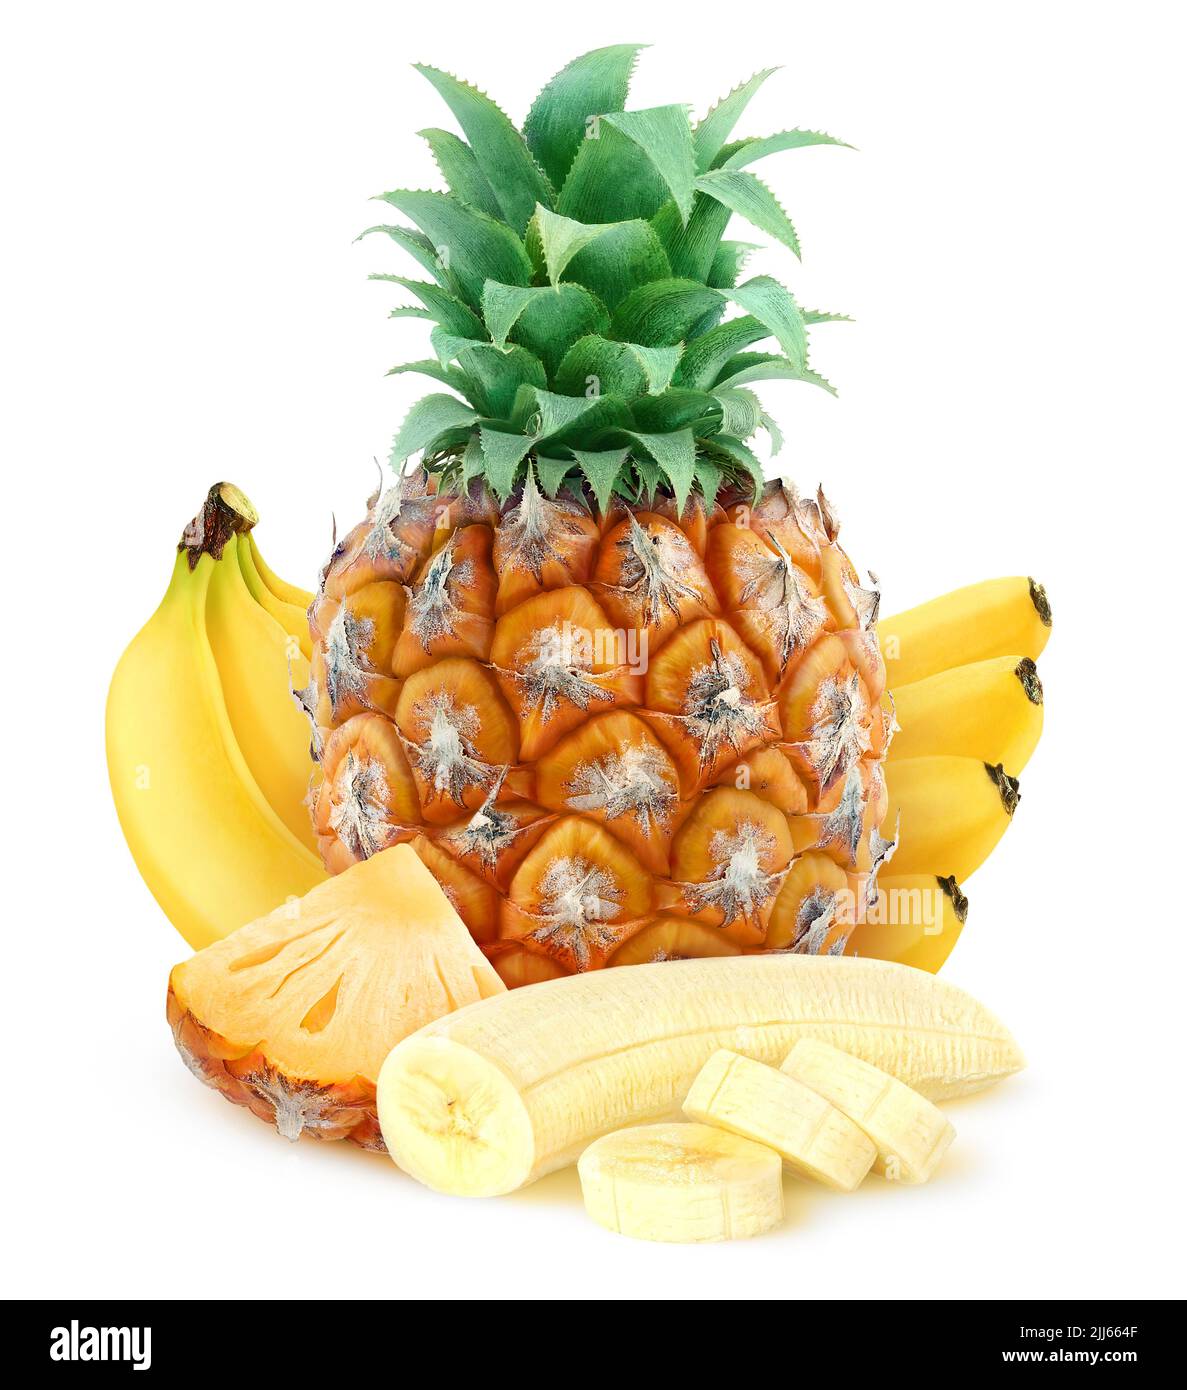 Pineapple and cut banana pieces isolated on white background Stock Photo